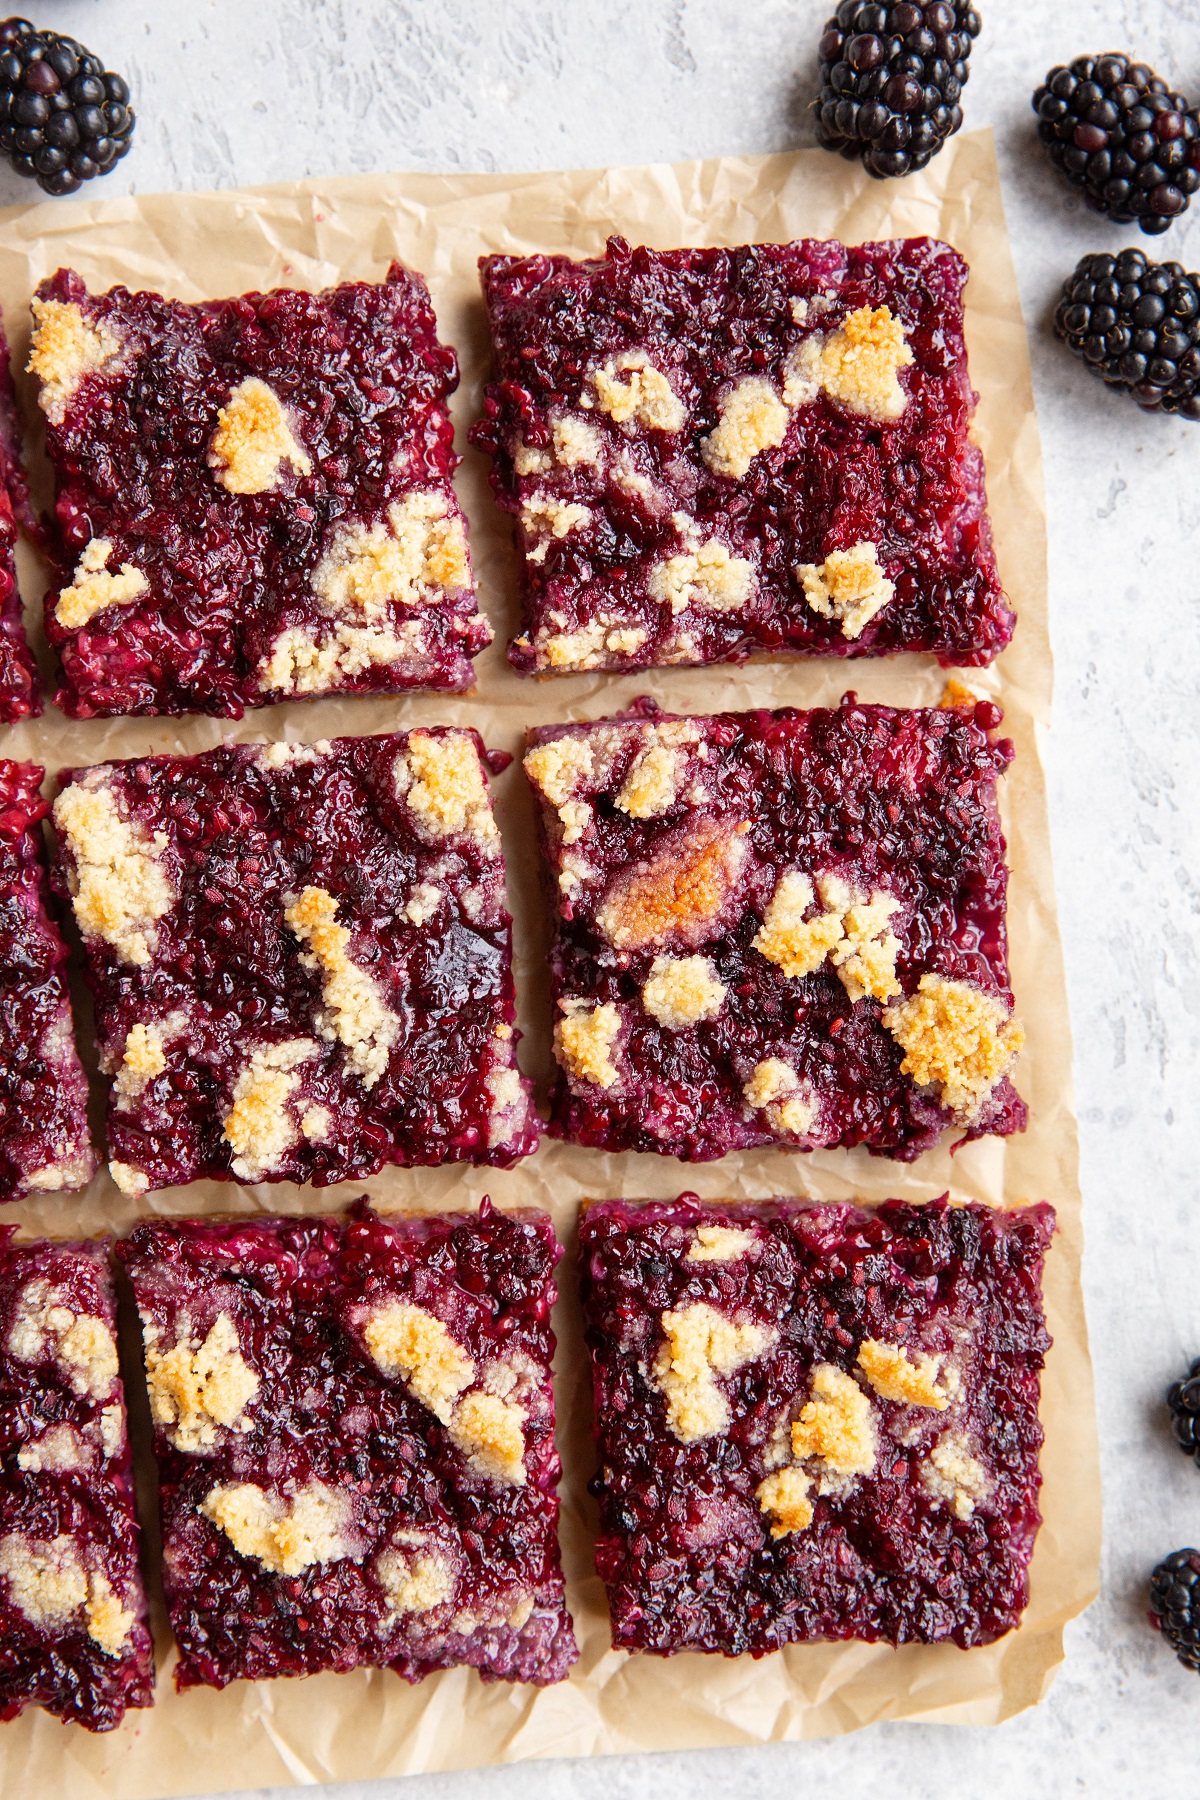 Sheet of parchment paper with blackberry bars on top with fresh blackberries all around.